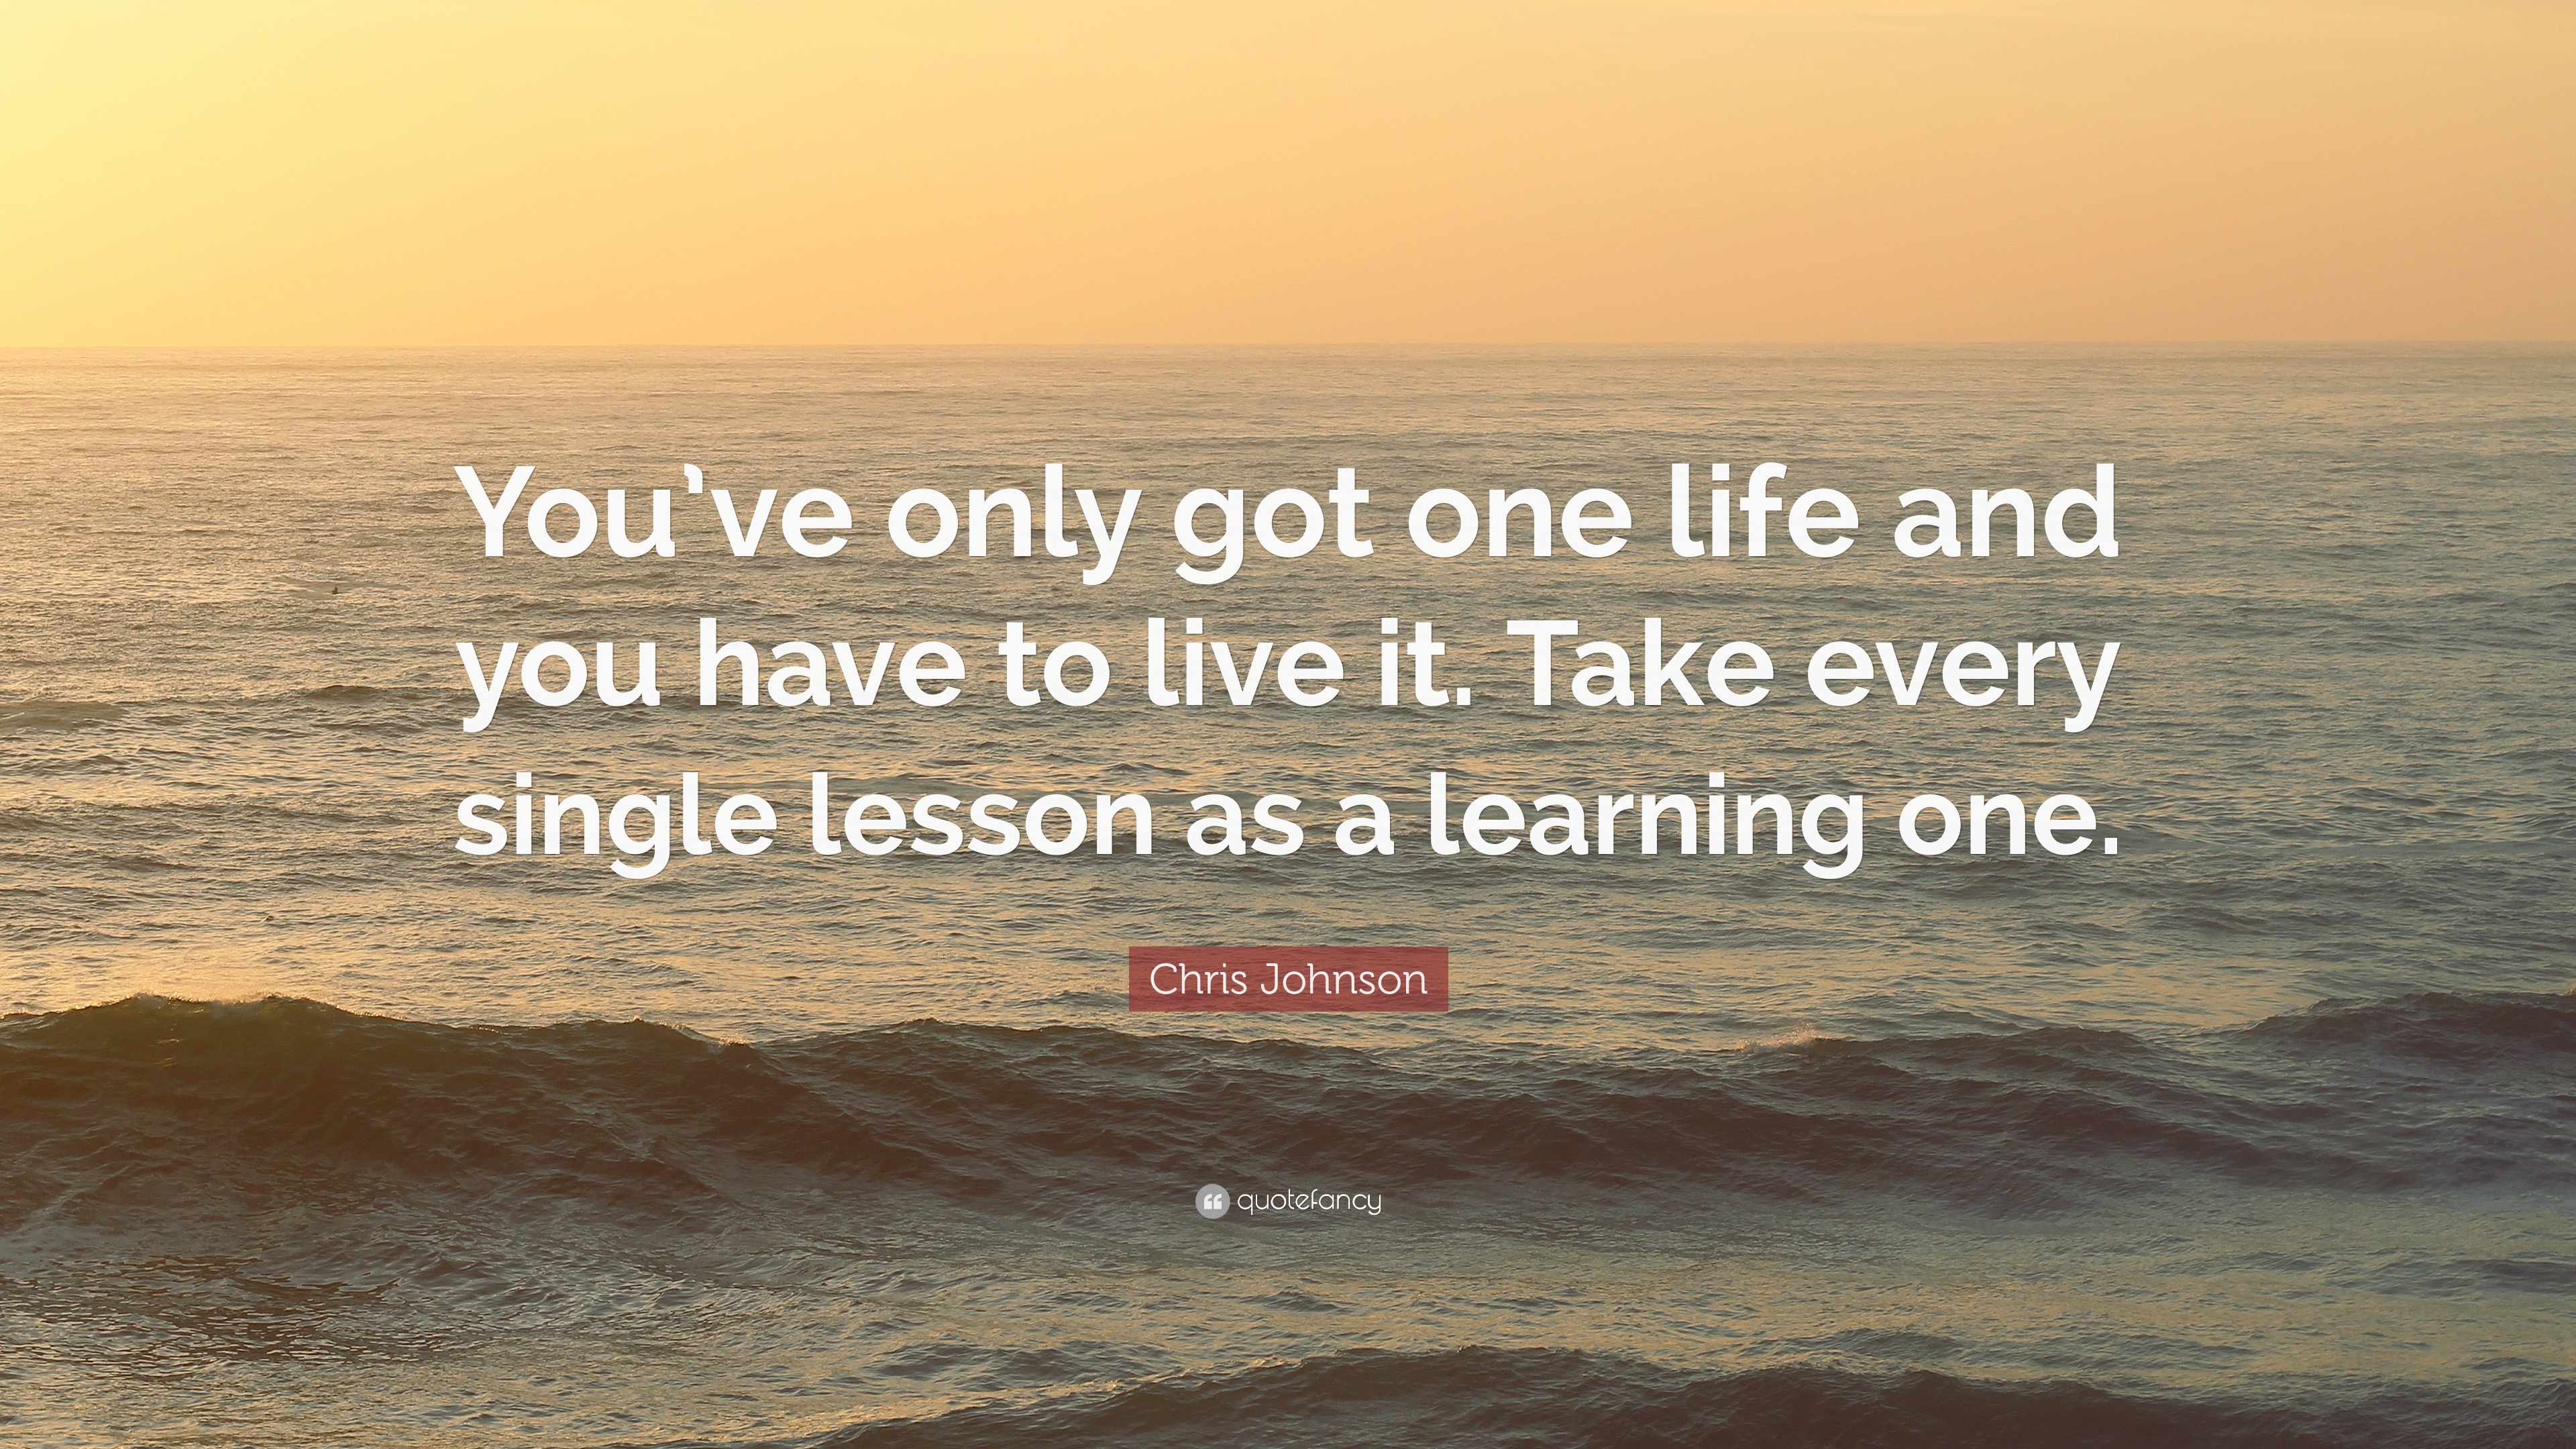 Chris Johnson Quote: “You’ve only got one life and you have to live it ...